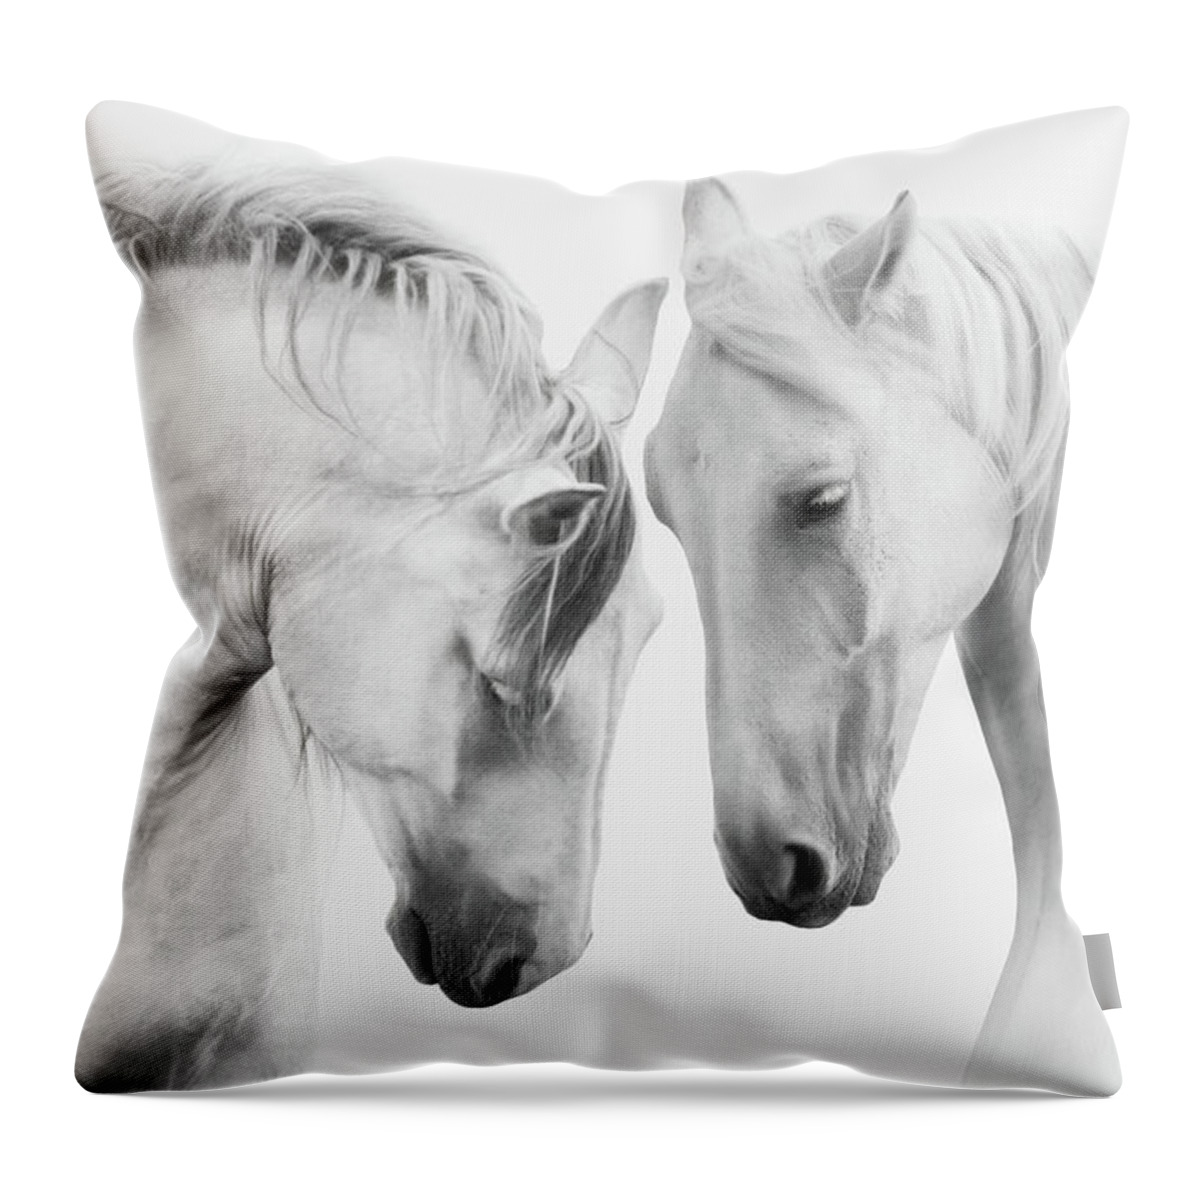 Horses Throw Pillow featuring the photograph Horses Face to Face in Black and White by Steve Ladner